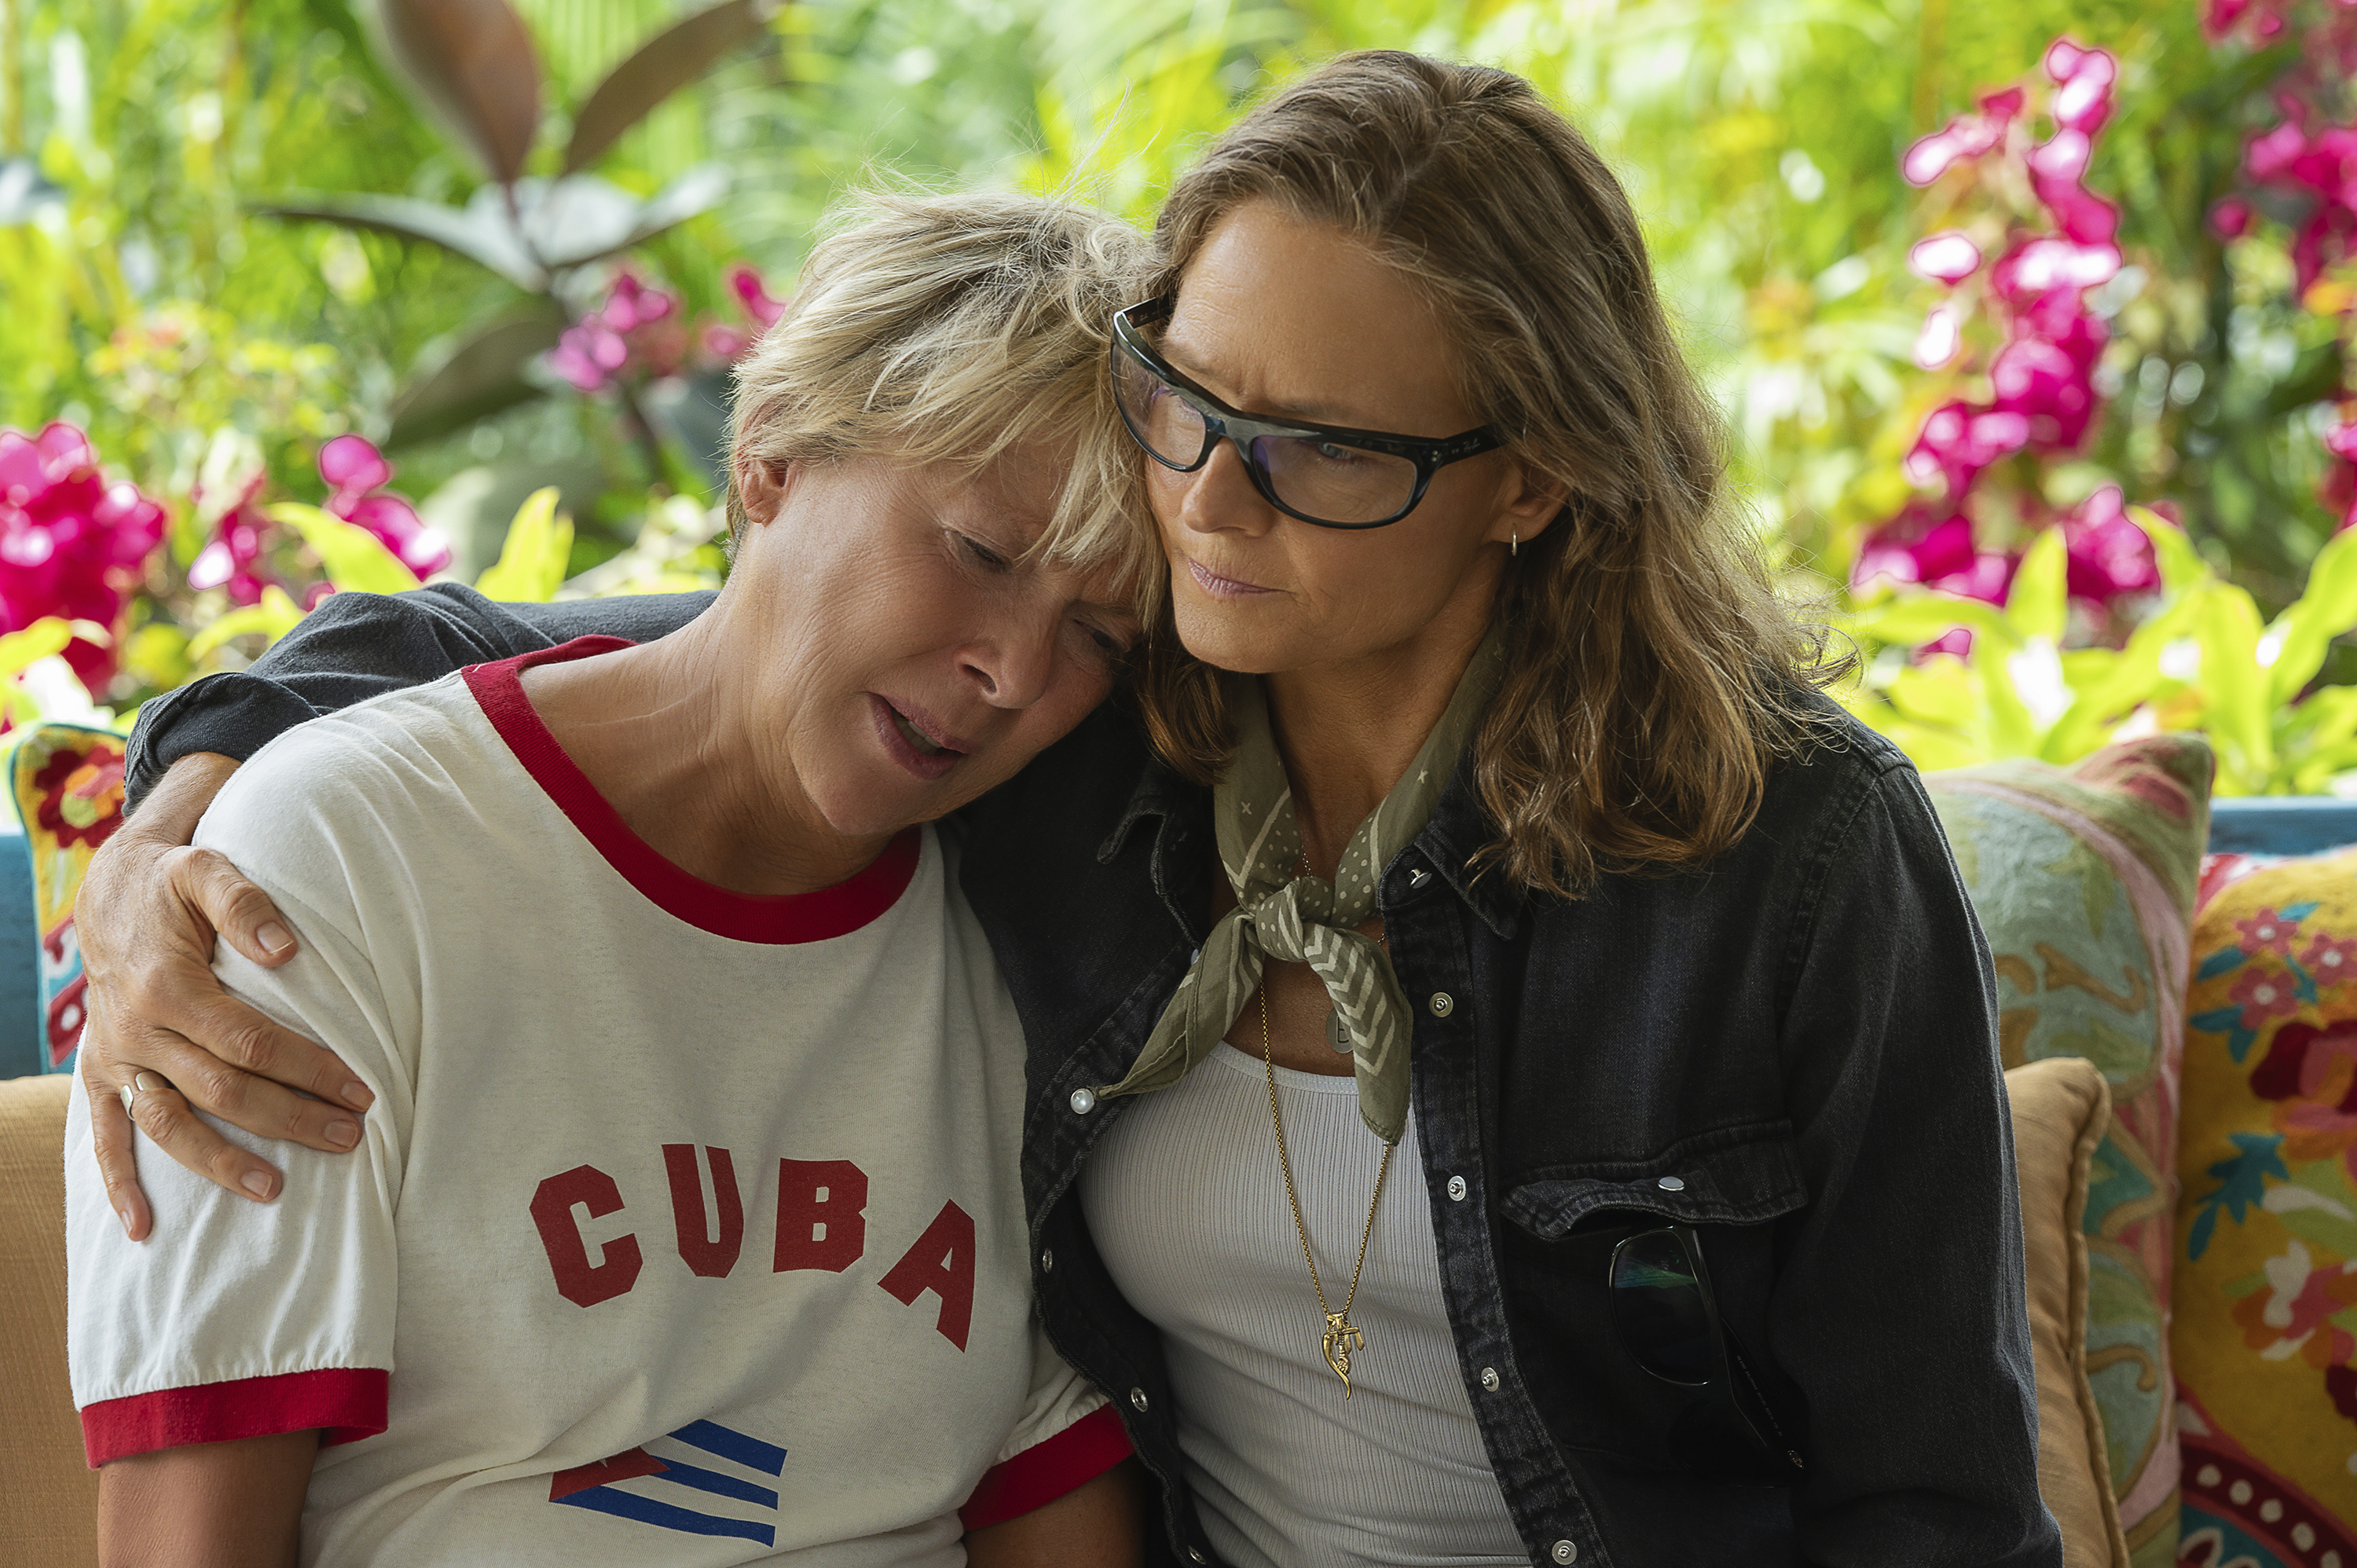 Jodie portrayed Bonnie Stoll, trainer of swimmer Diana Nyad, played by Annette Bening